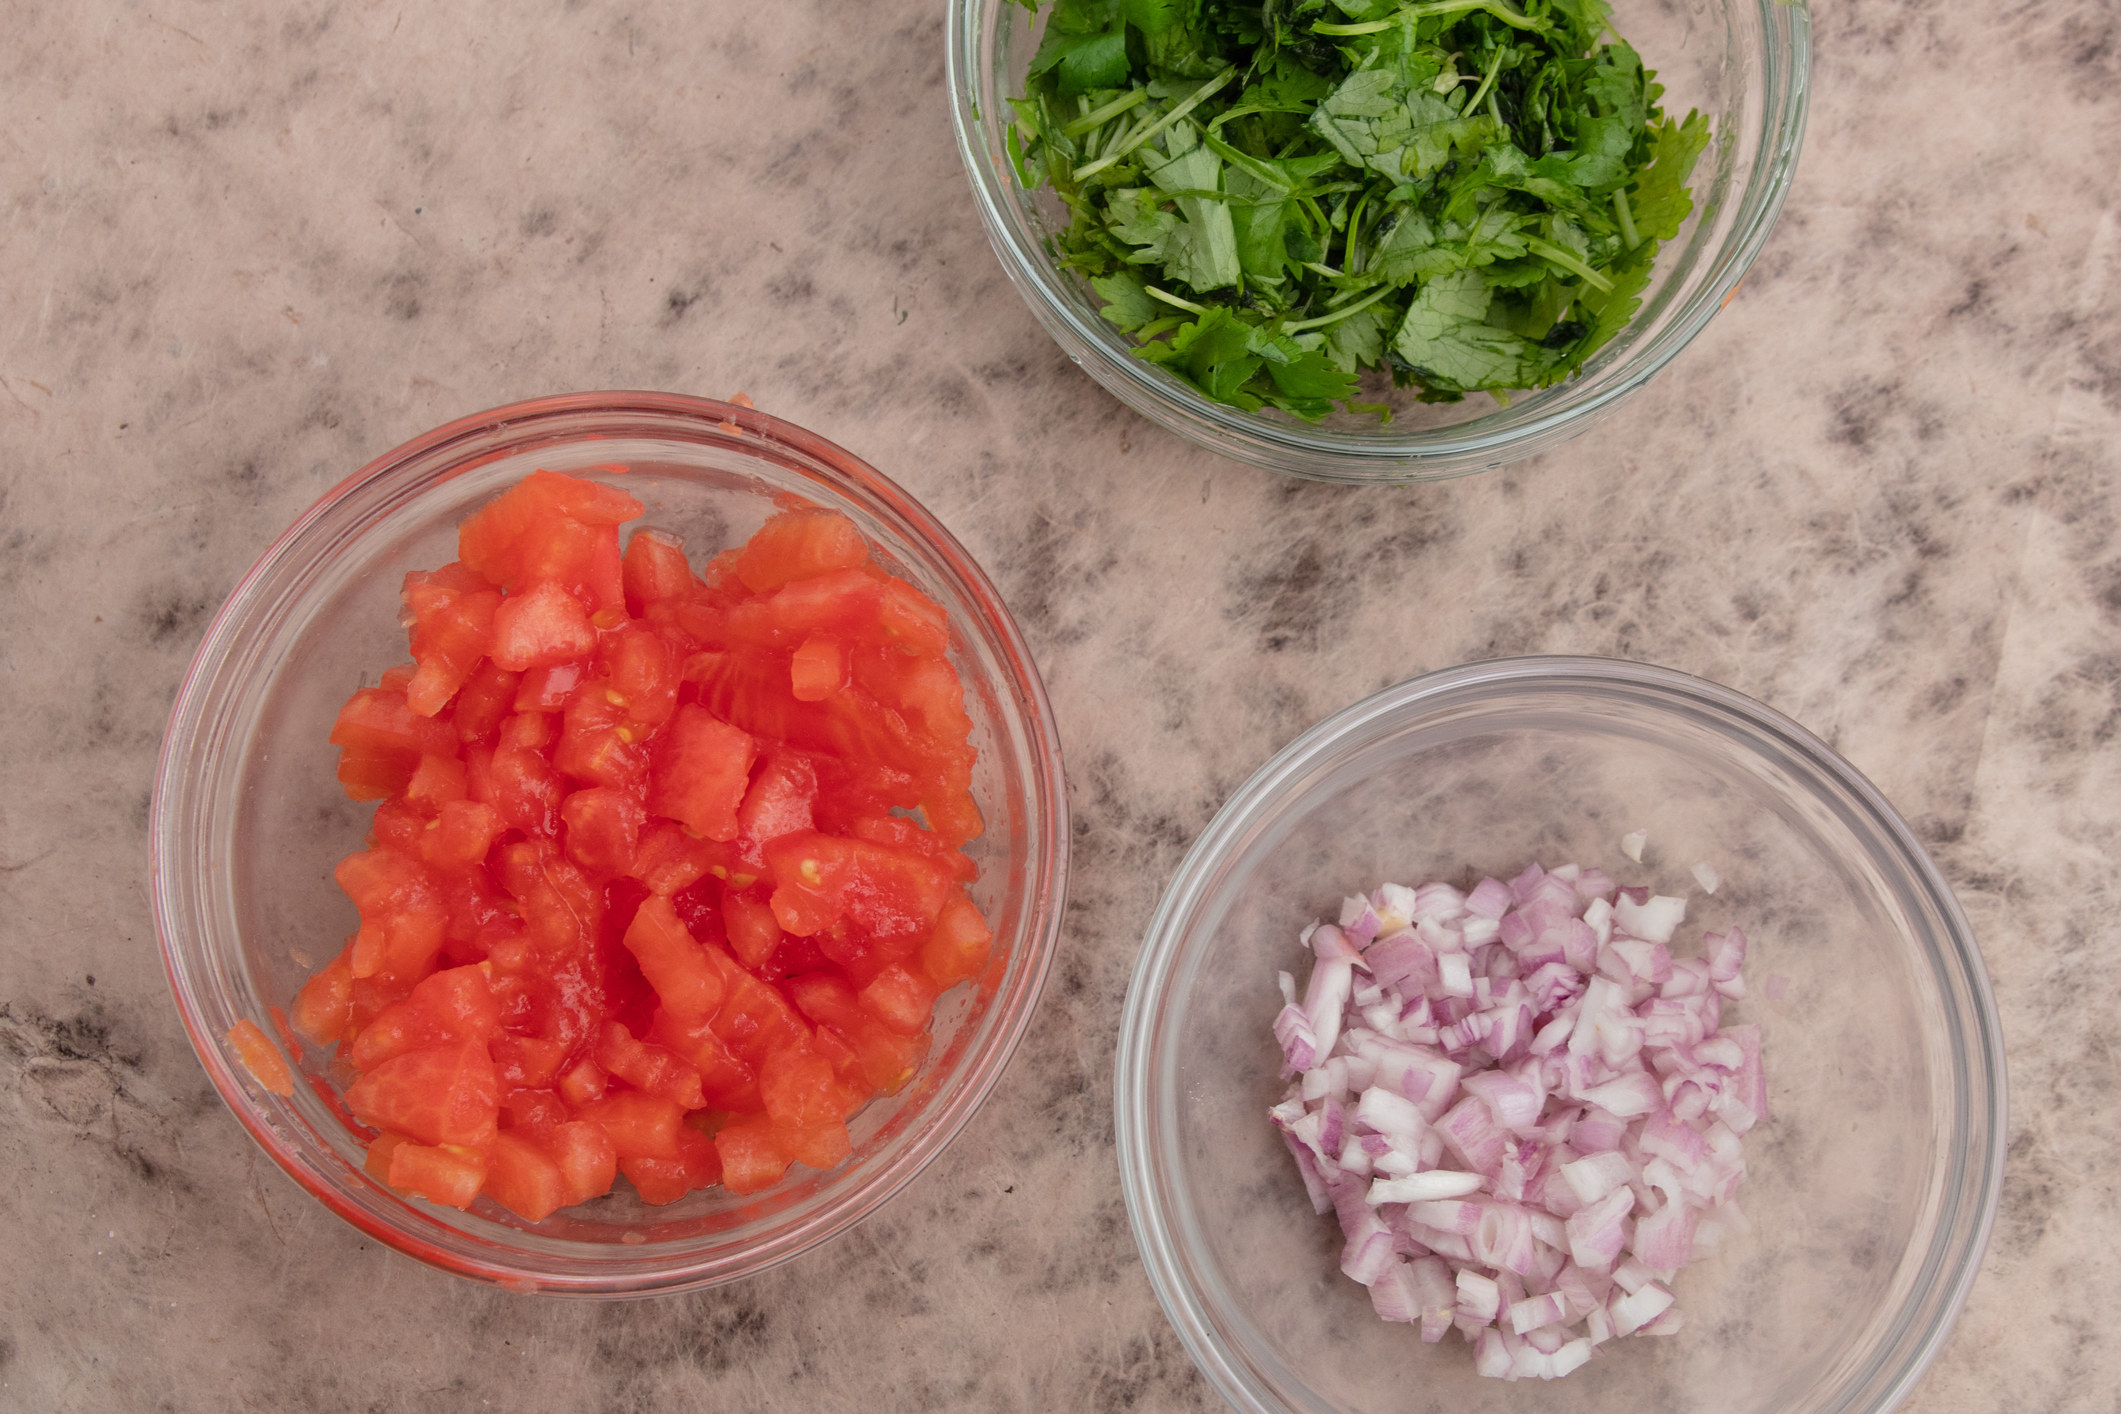 Chopped tomatoes, herbs, and shallot.